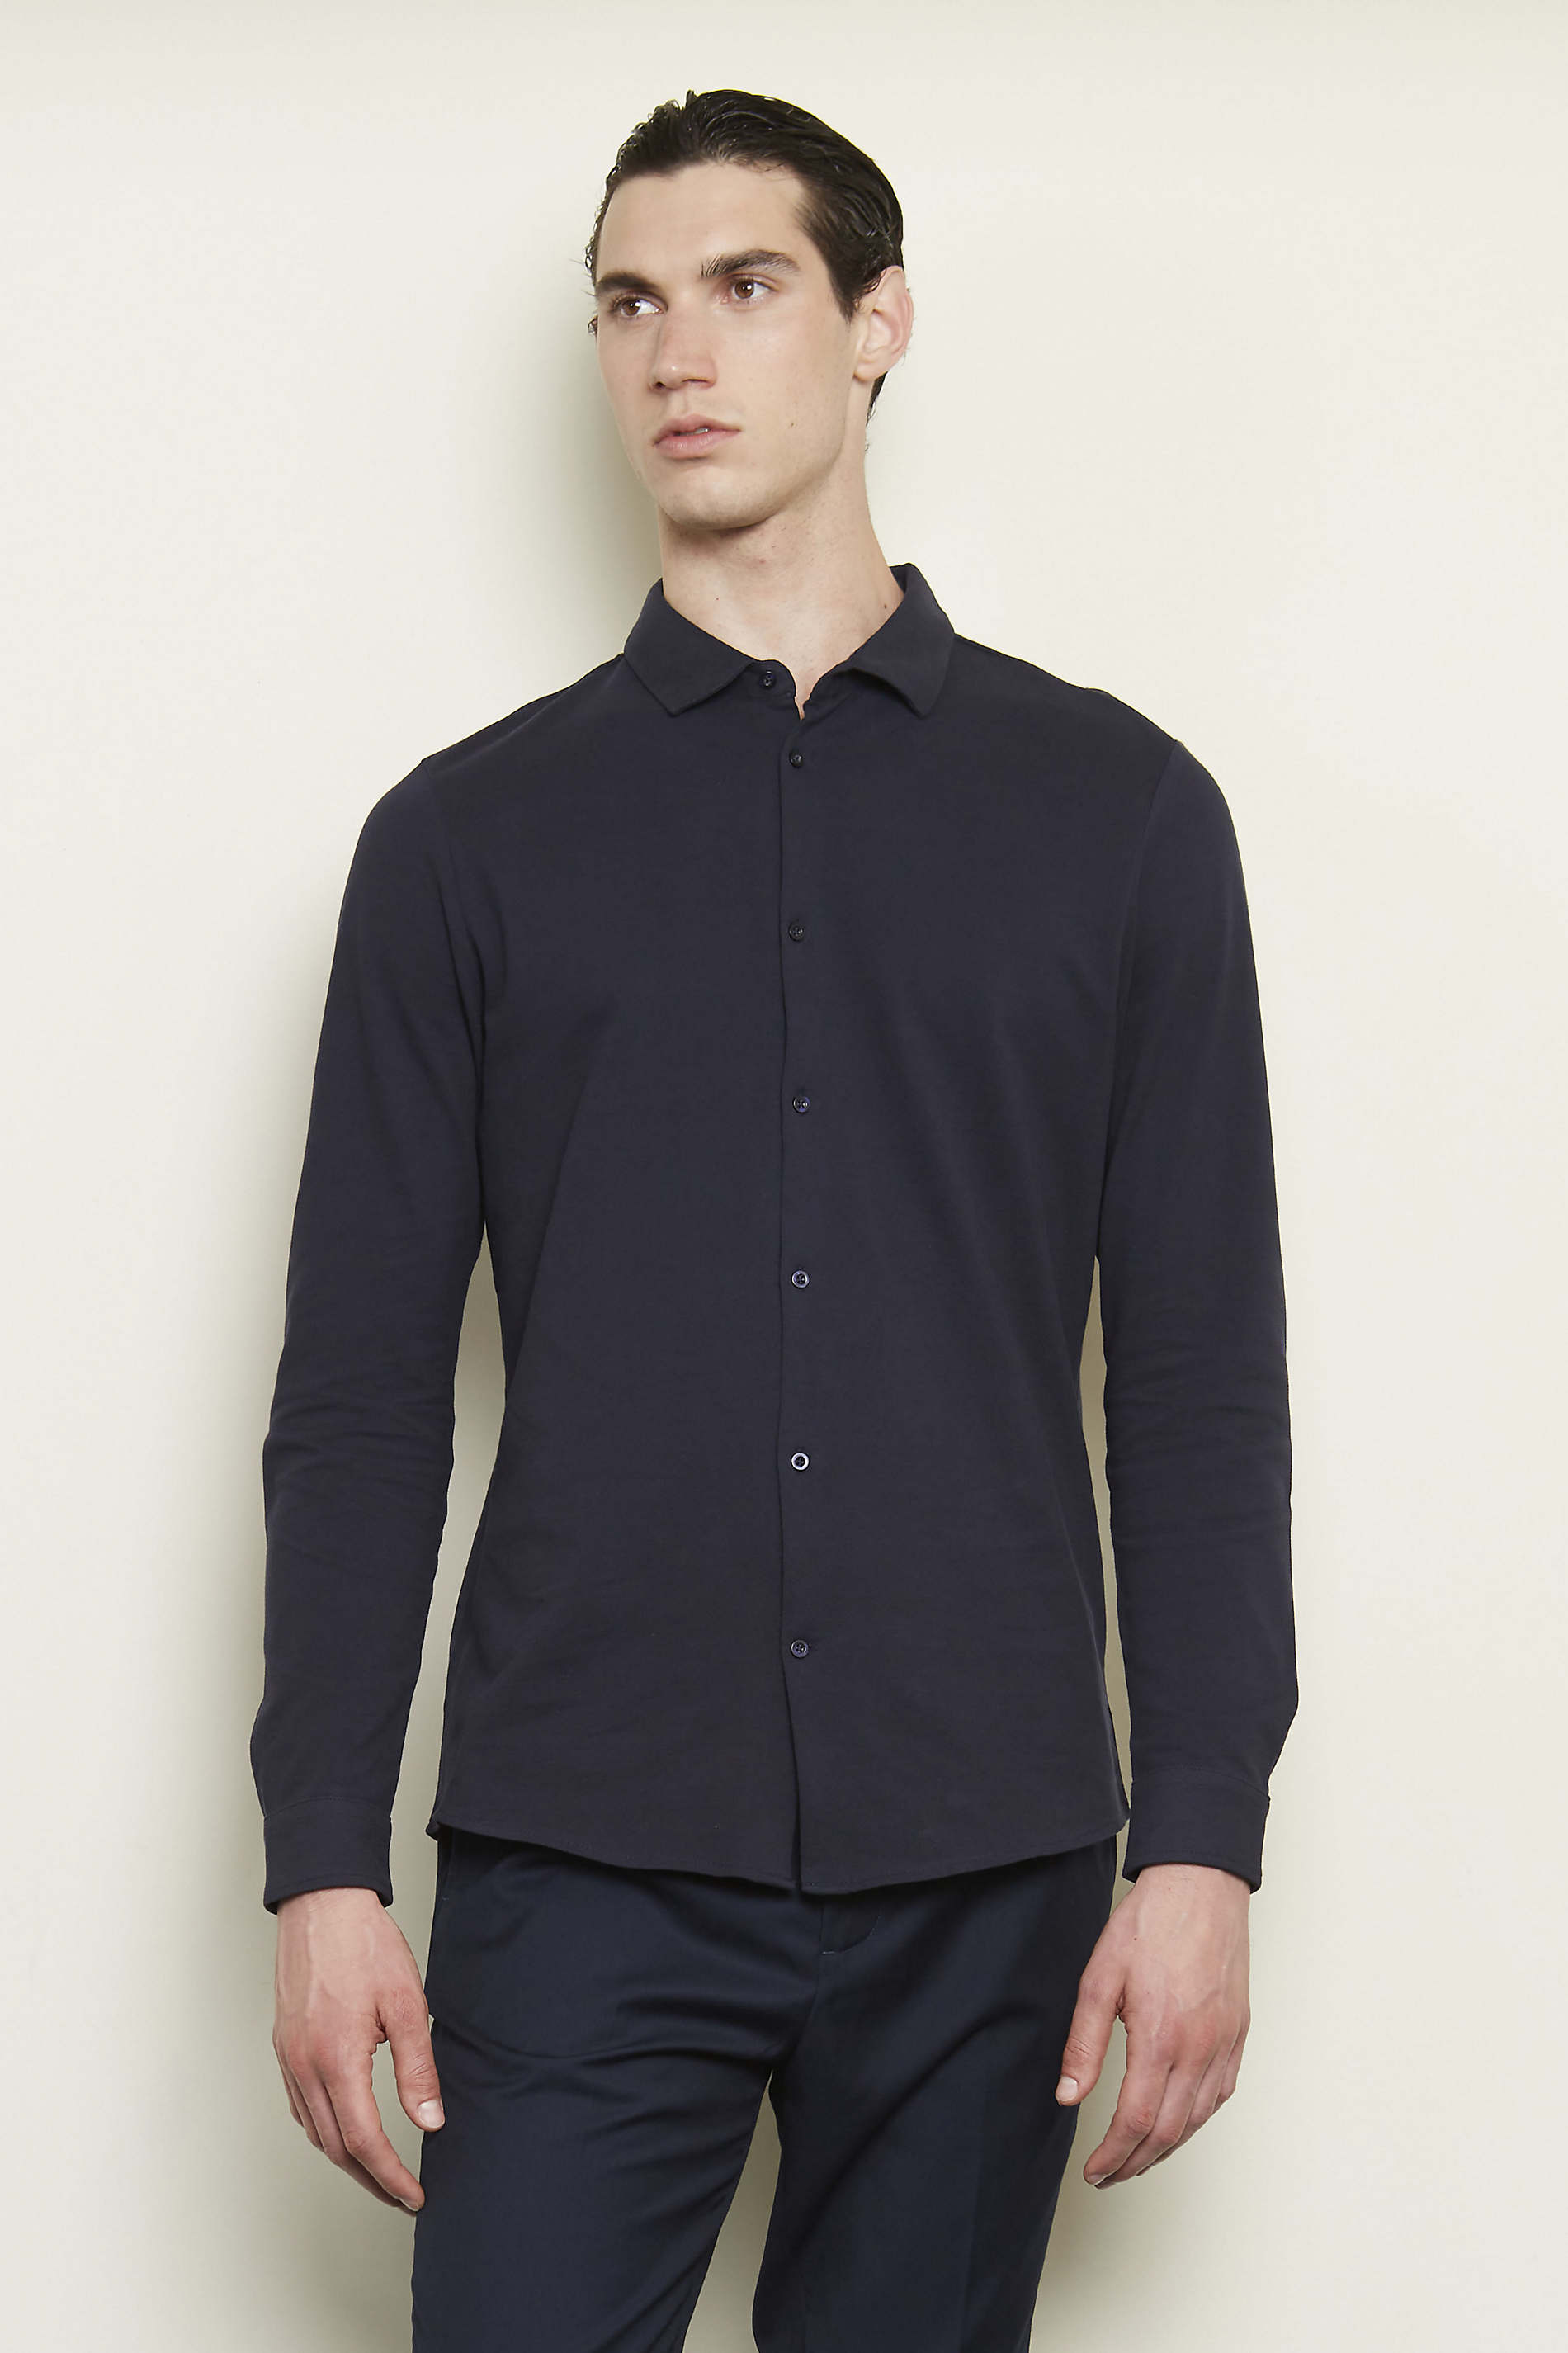 MEN'S COTTON PIQUÉ SHIRT<br/><p>The only apparently classic NEOBLU BASILE shirt is made of 100% organic cotton piqué, a material that gives it a more casual style allowing it to be paired with all types of trousers and jackets.</p> NEOBLU BASILE MEN